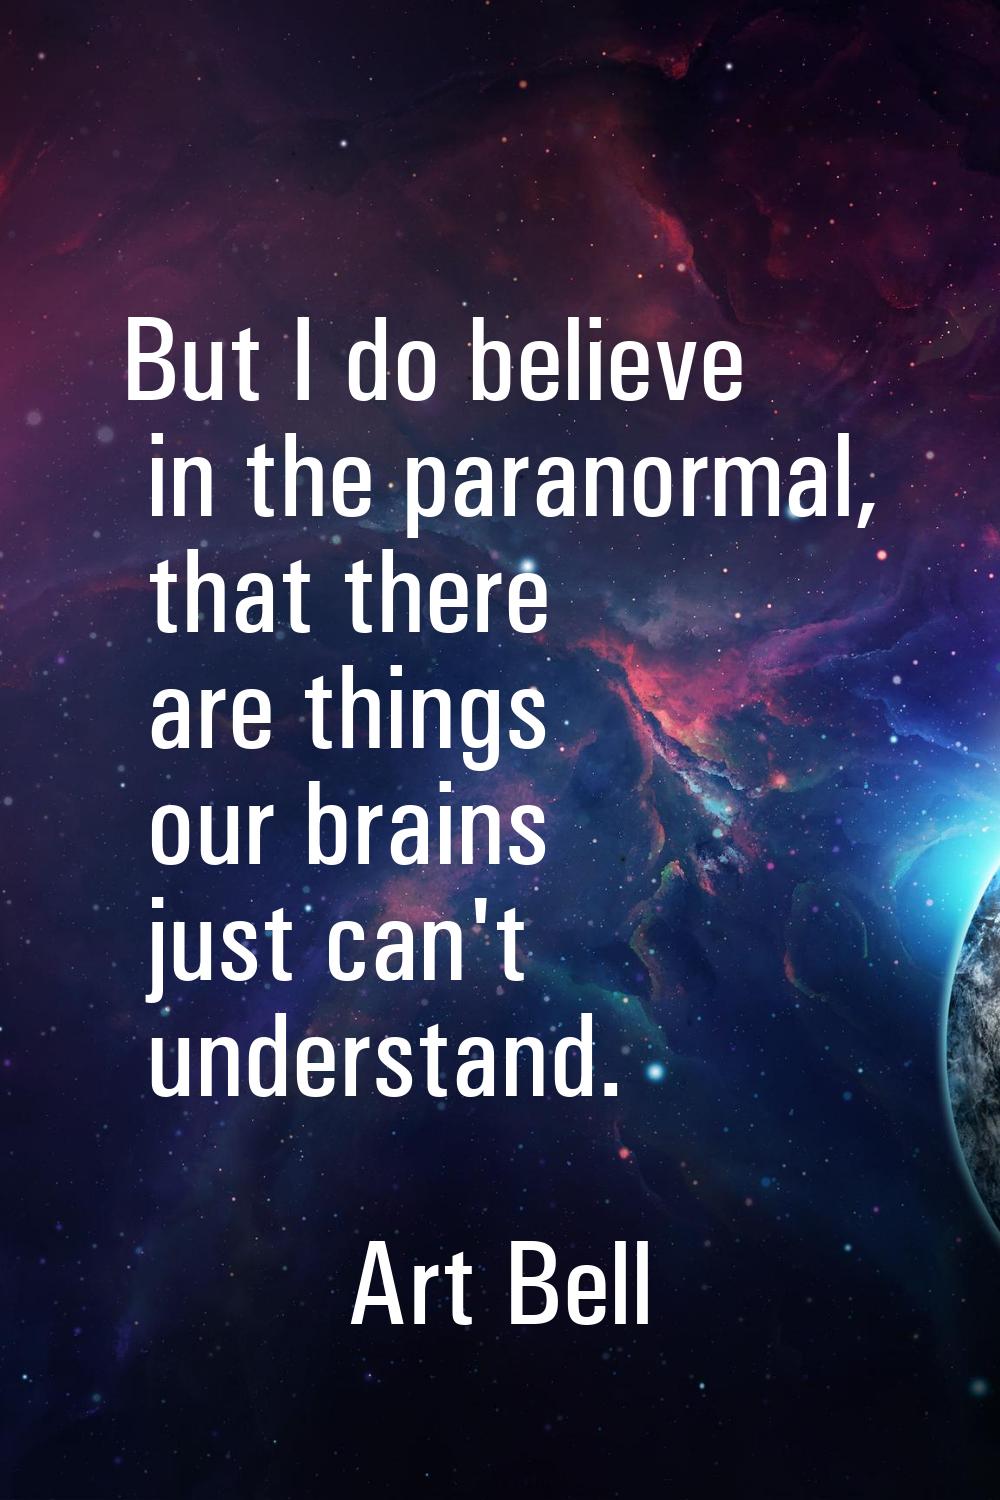 But I do believe in the paranormal, that there are things our brains just can't understand.